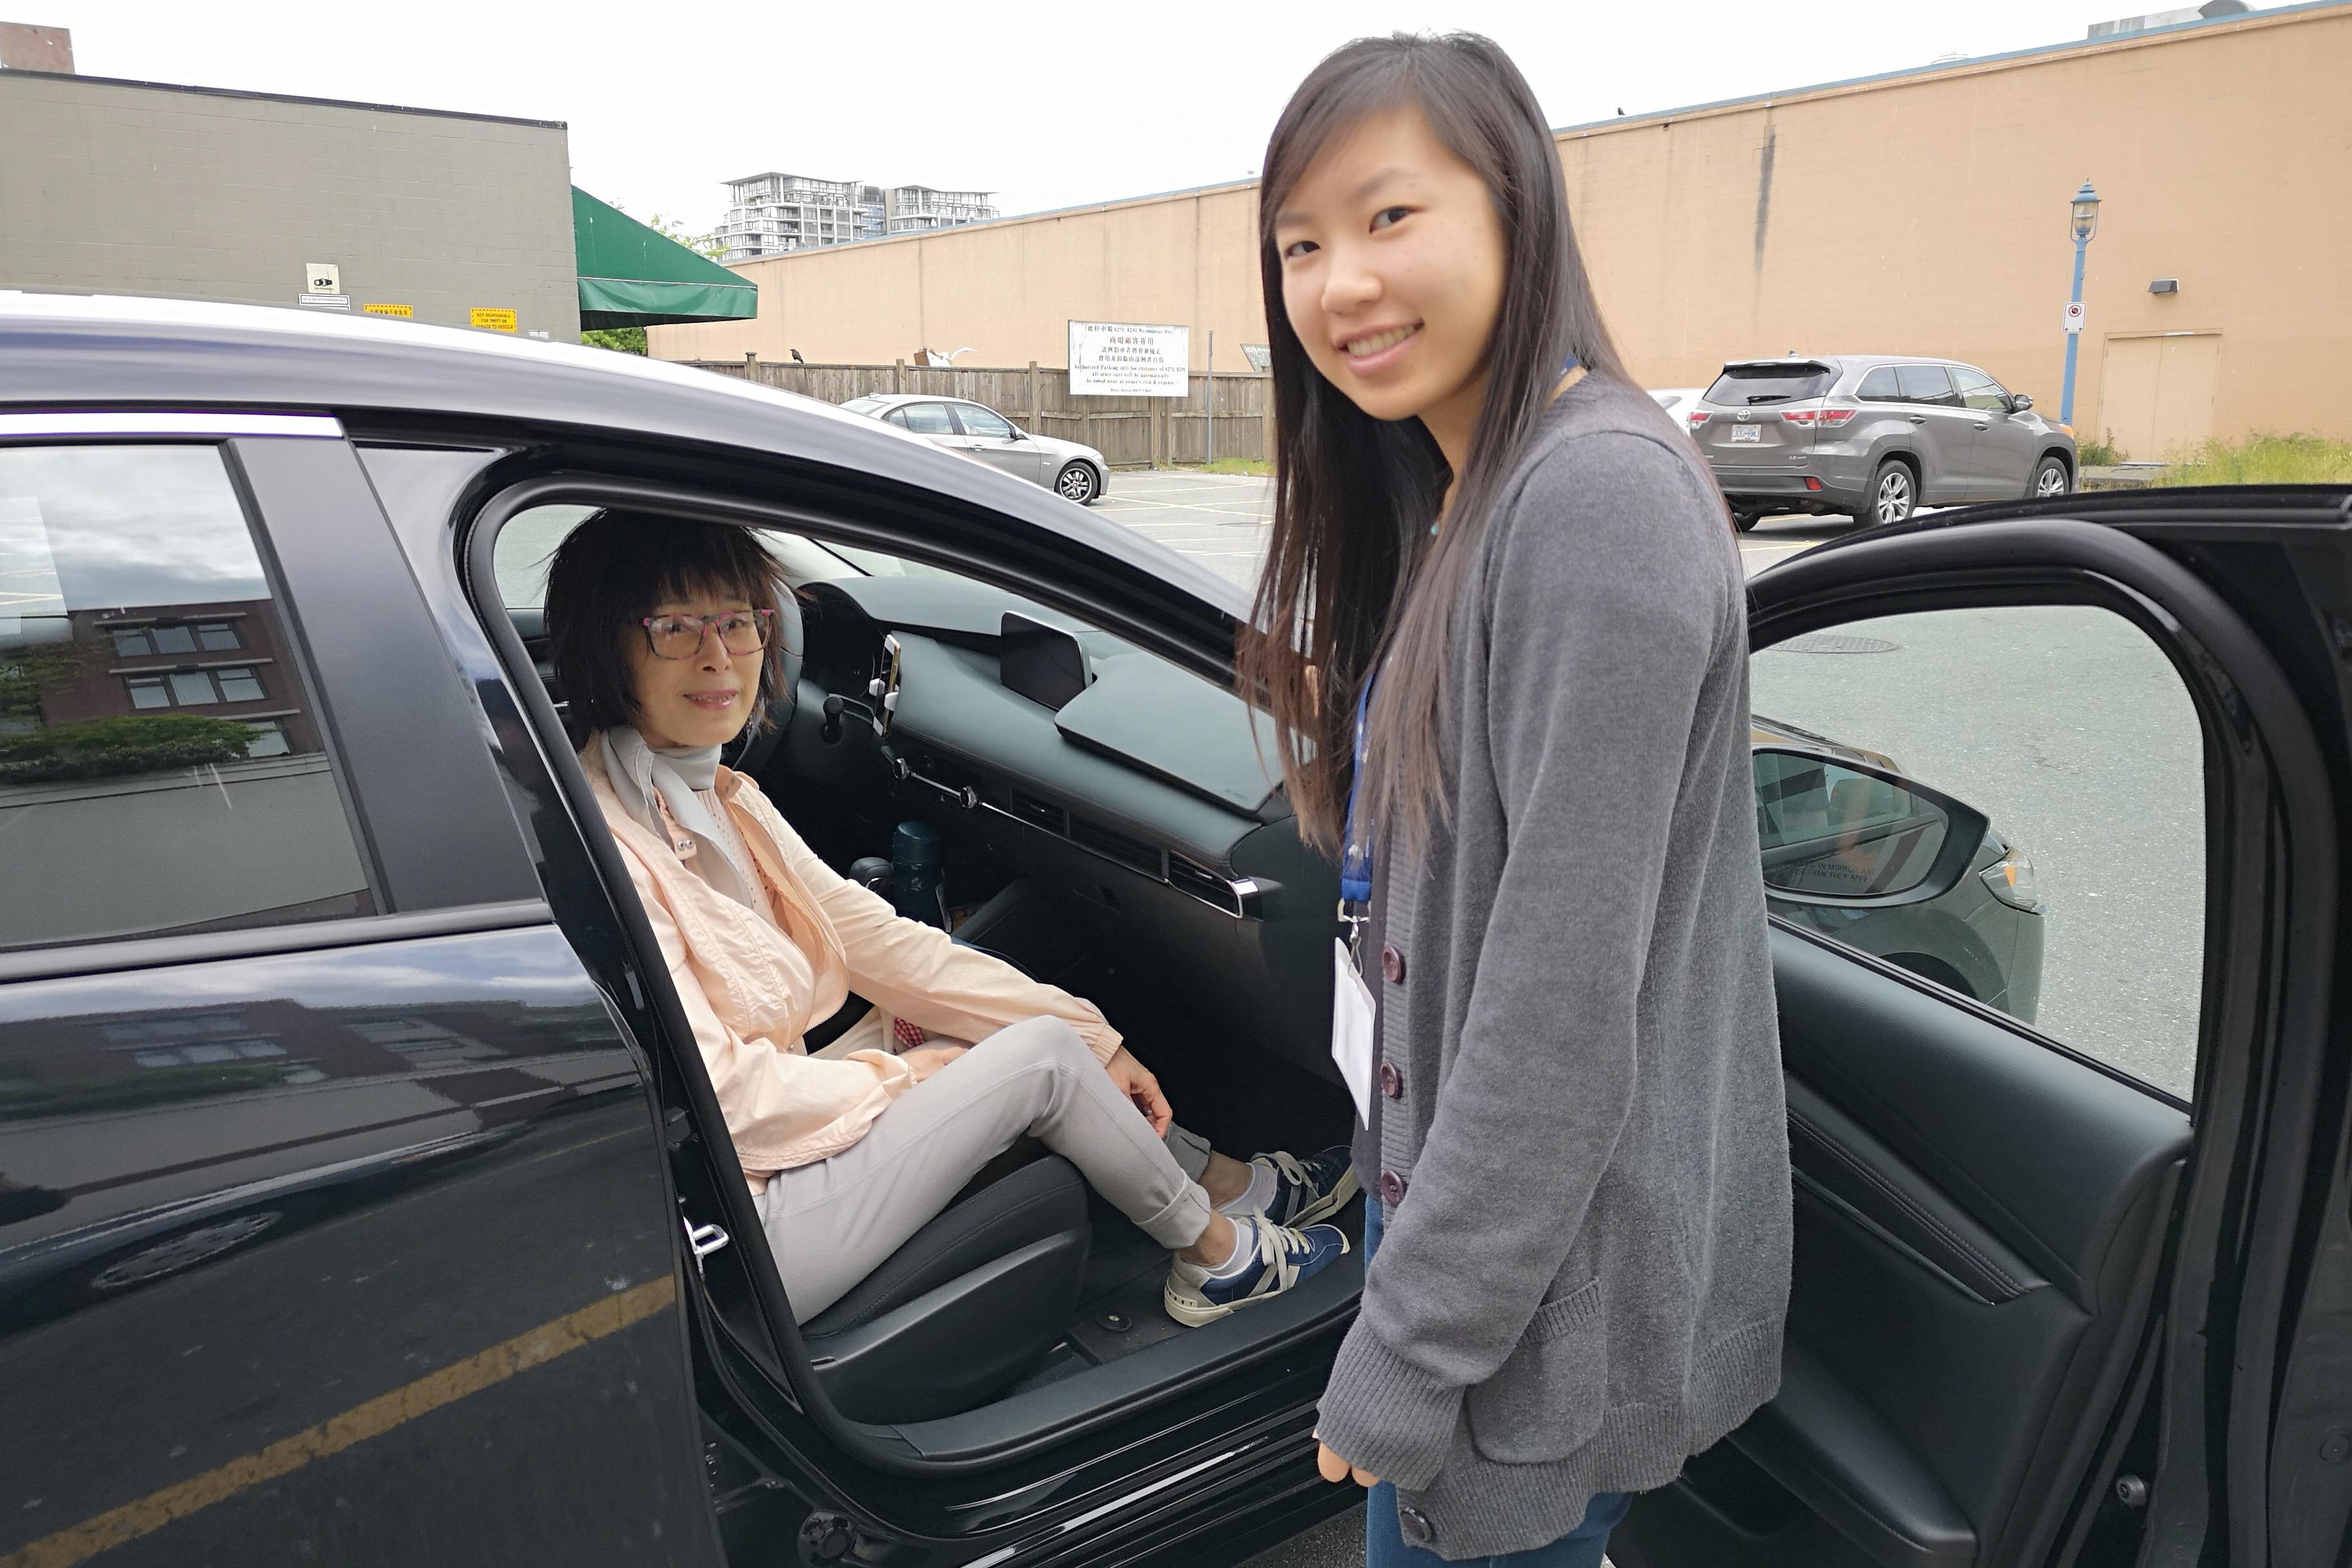 A Woman Sitting in a Car with the Door Open, While Another Woman Stands Next to Her